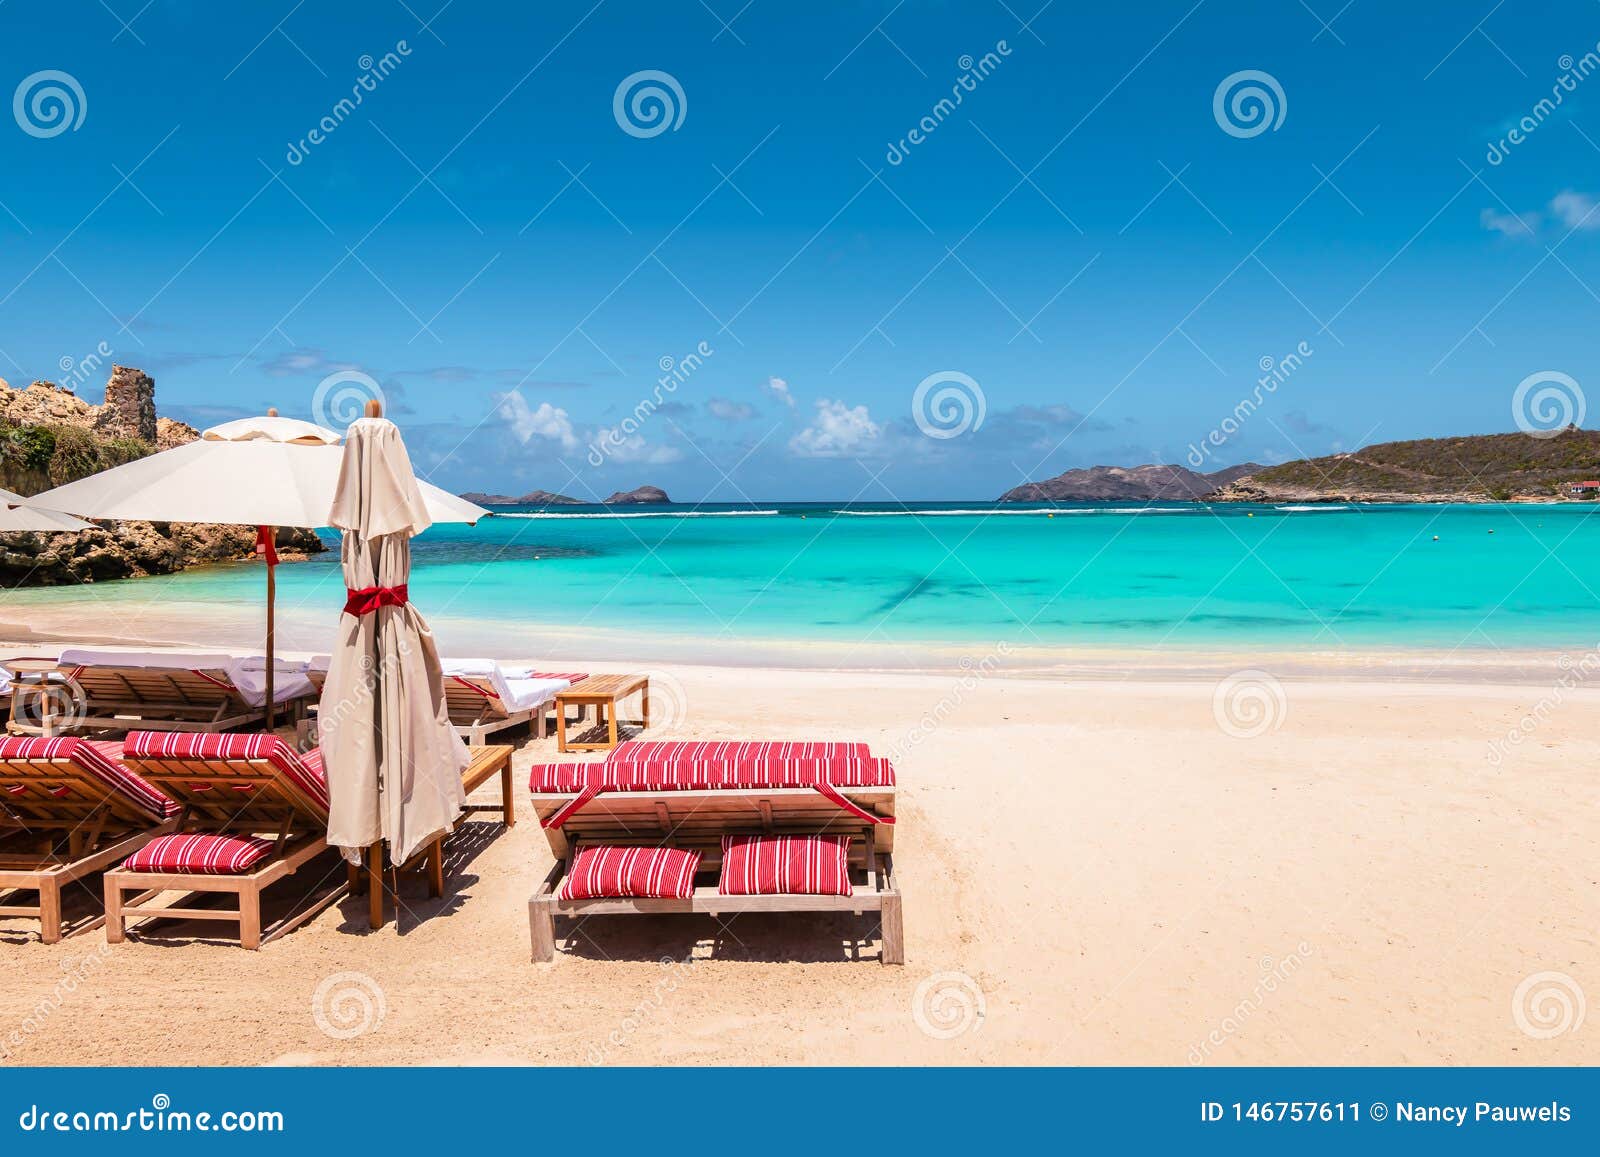 Beach Chairs And Umbrella On Tropical Beach Summer Vacation And